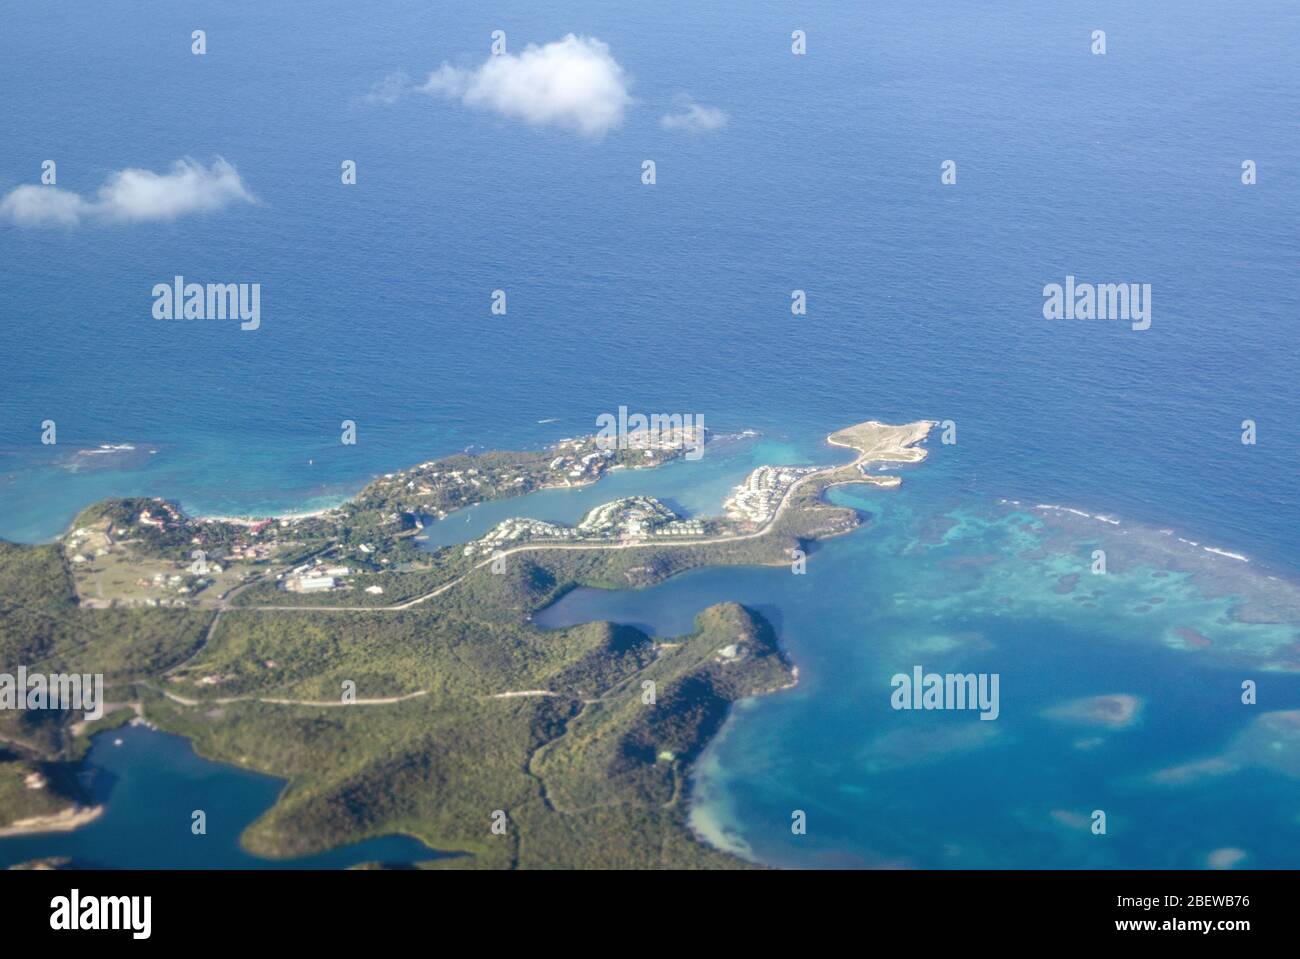 Aerial view of the Devil's Bridge National Park, Dian Bay, Pineapple Beach Club and Long Bay on the North East coast of Antigua in the Caribbean Sea. Stock Photo